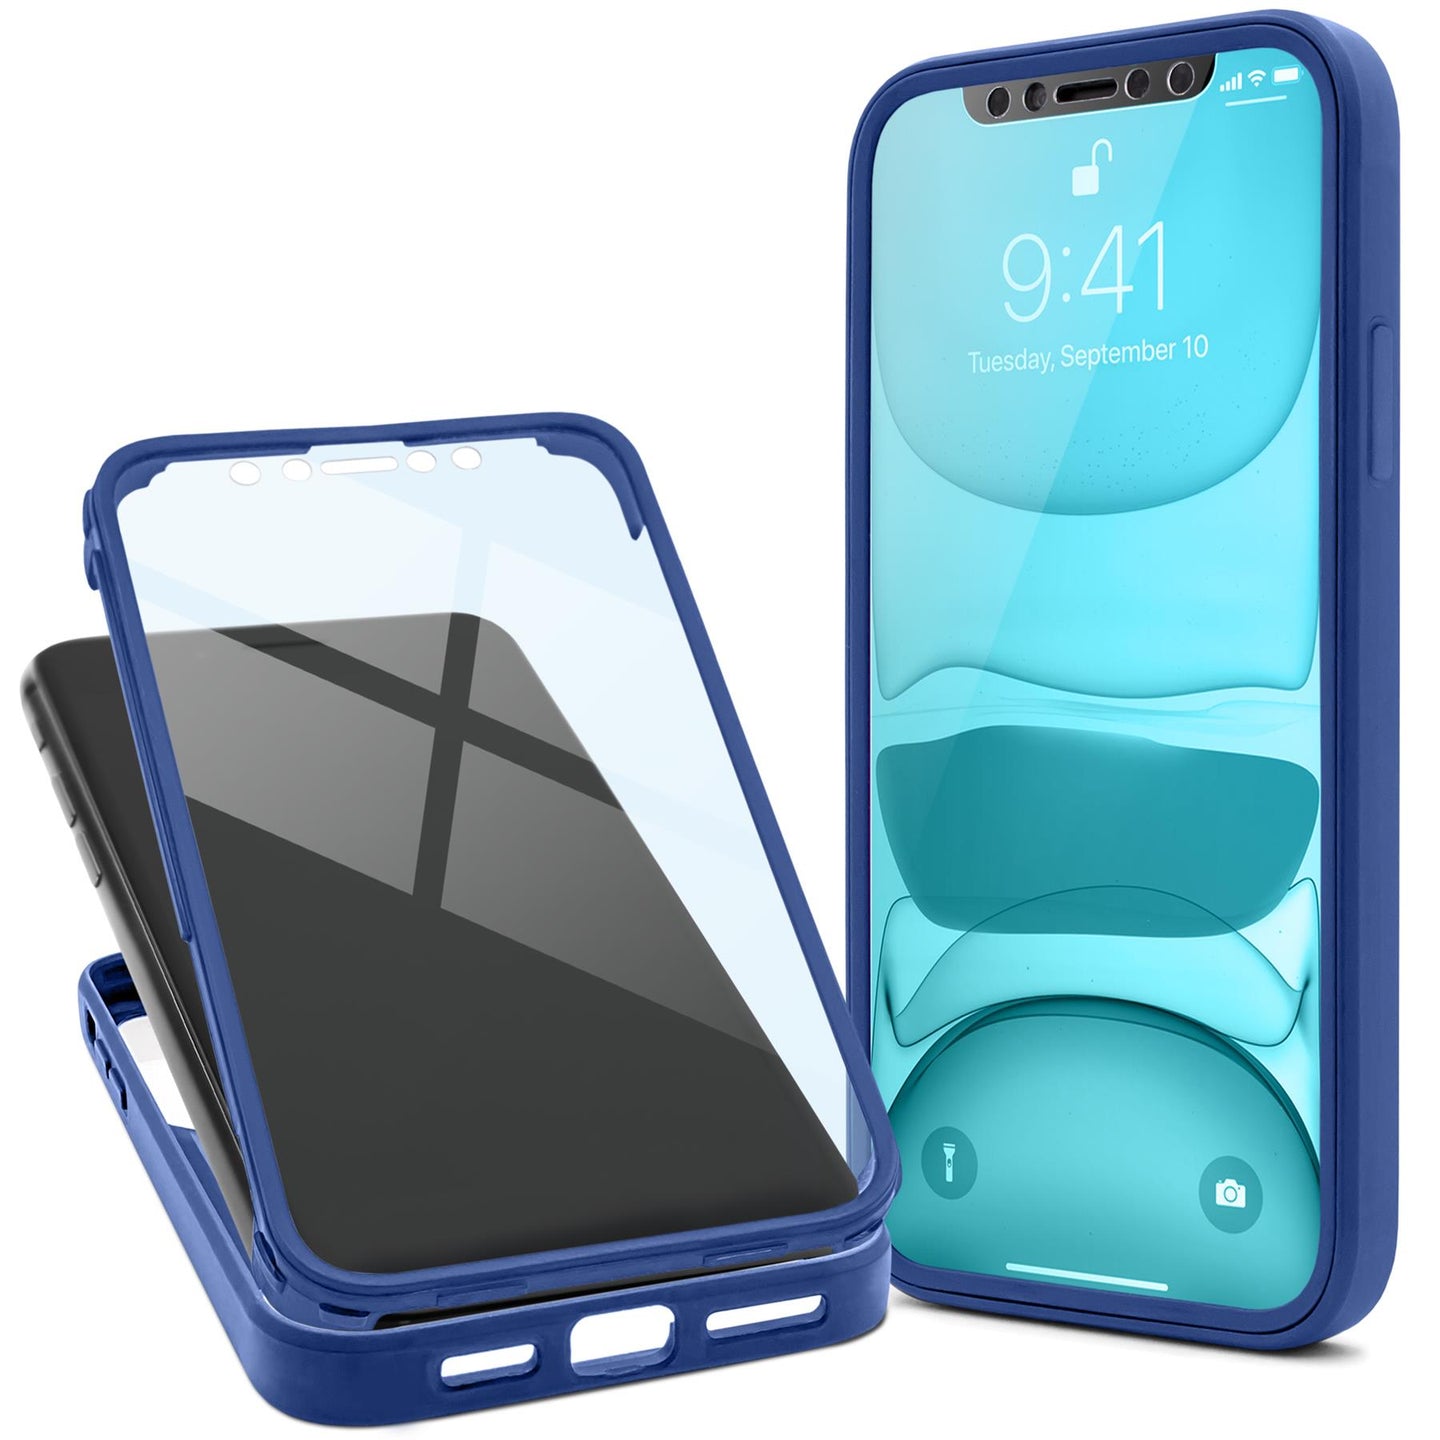 Moozy 360 Case for iPhone 12 / 12 Pro - Blue Rim Transparent Case, Full Body Double-sided Protection, Cover with Built-in Screen Protector